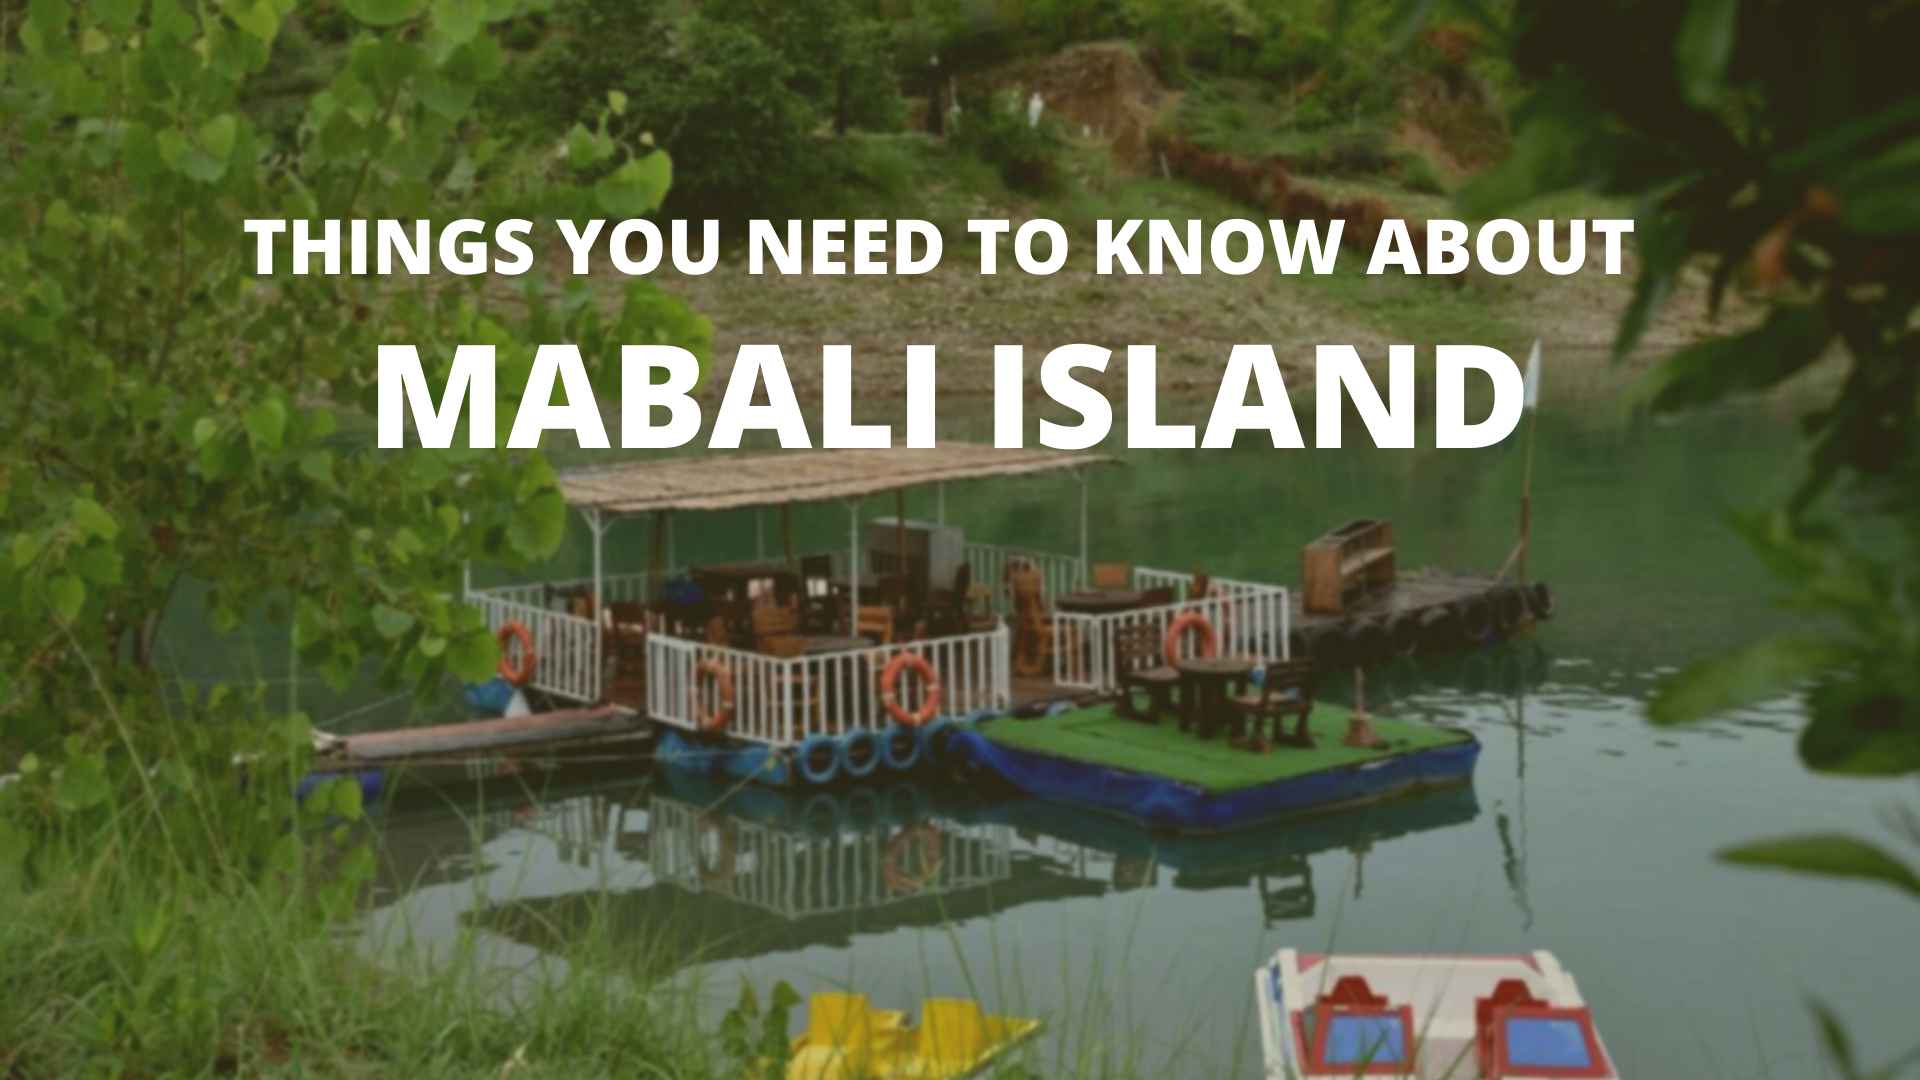 Important Things You Need to Know about Mabali Island